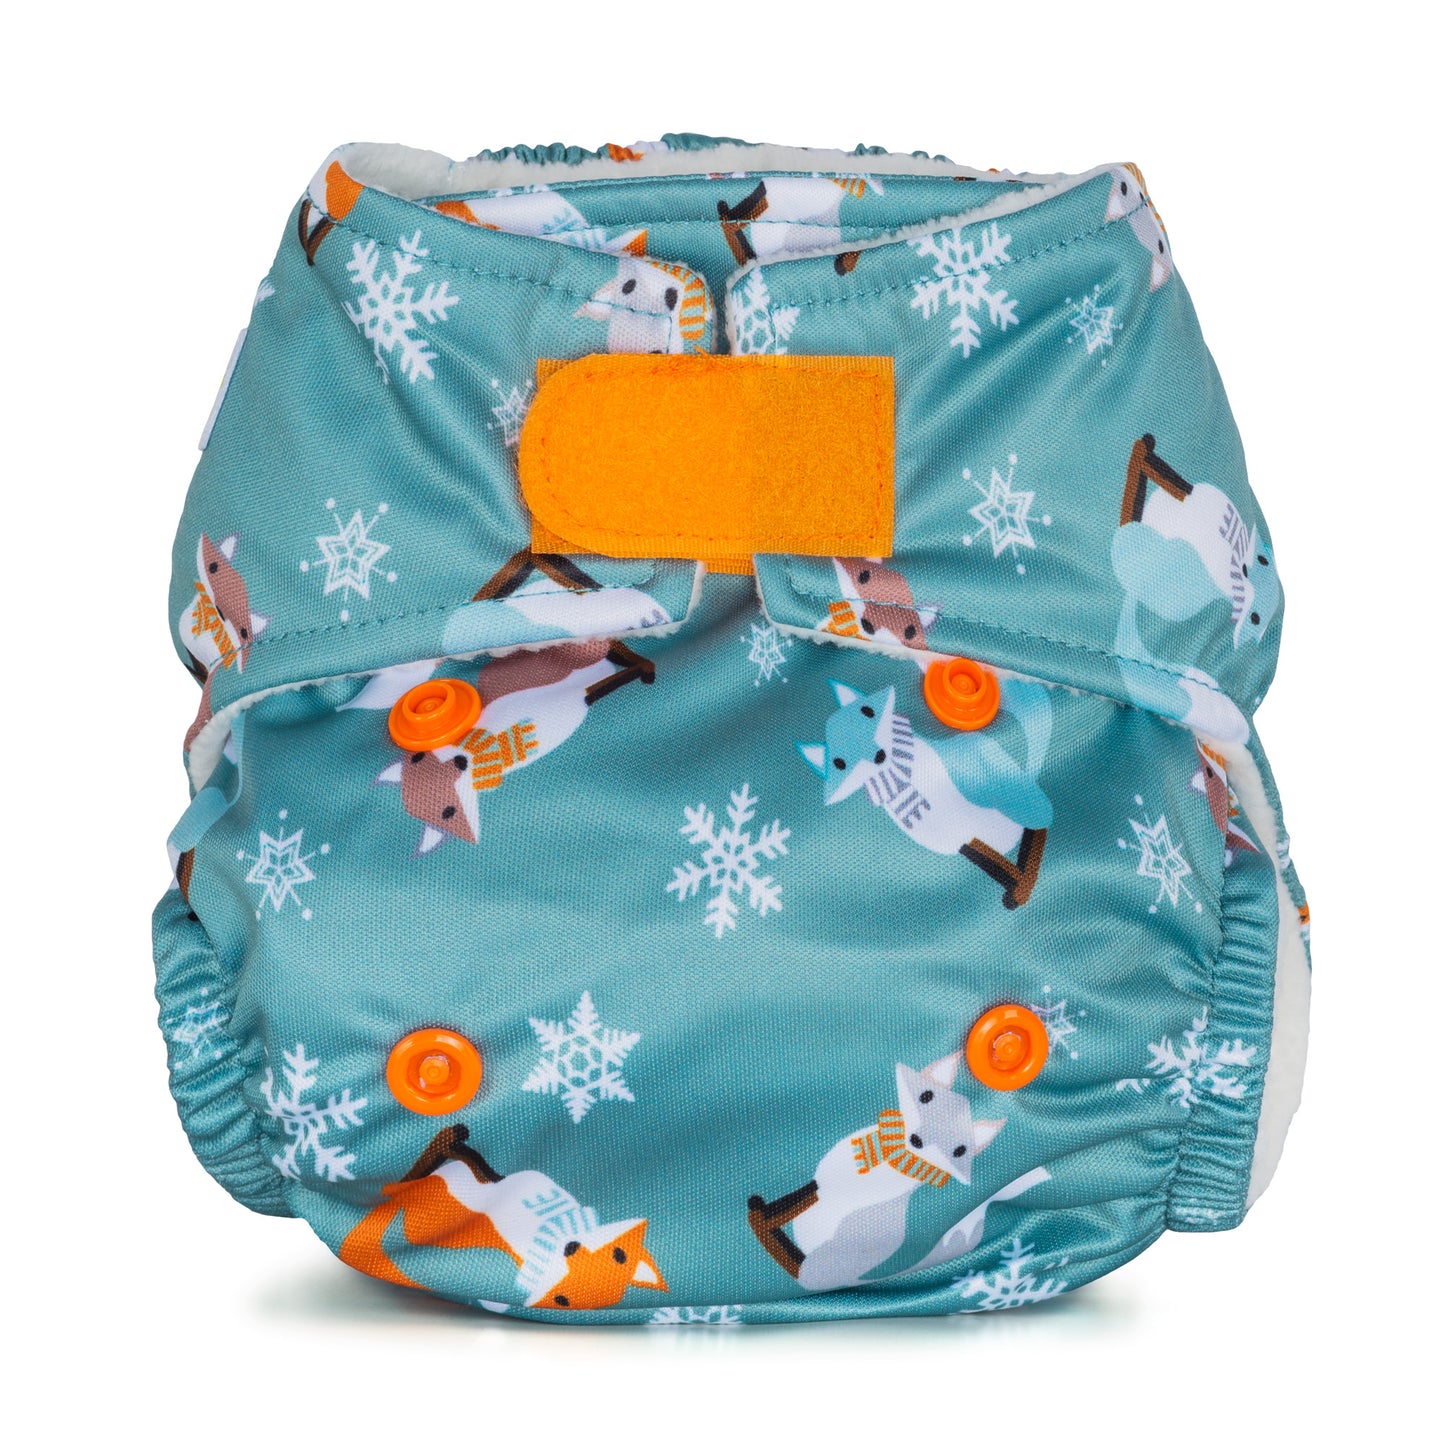 Blue Baba+Boo Newborn Frosty Foxes SnowReusable Cloth Nappy